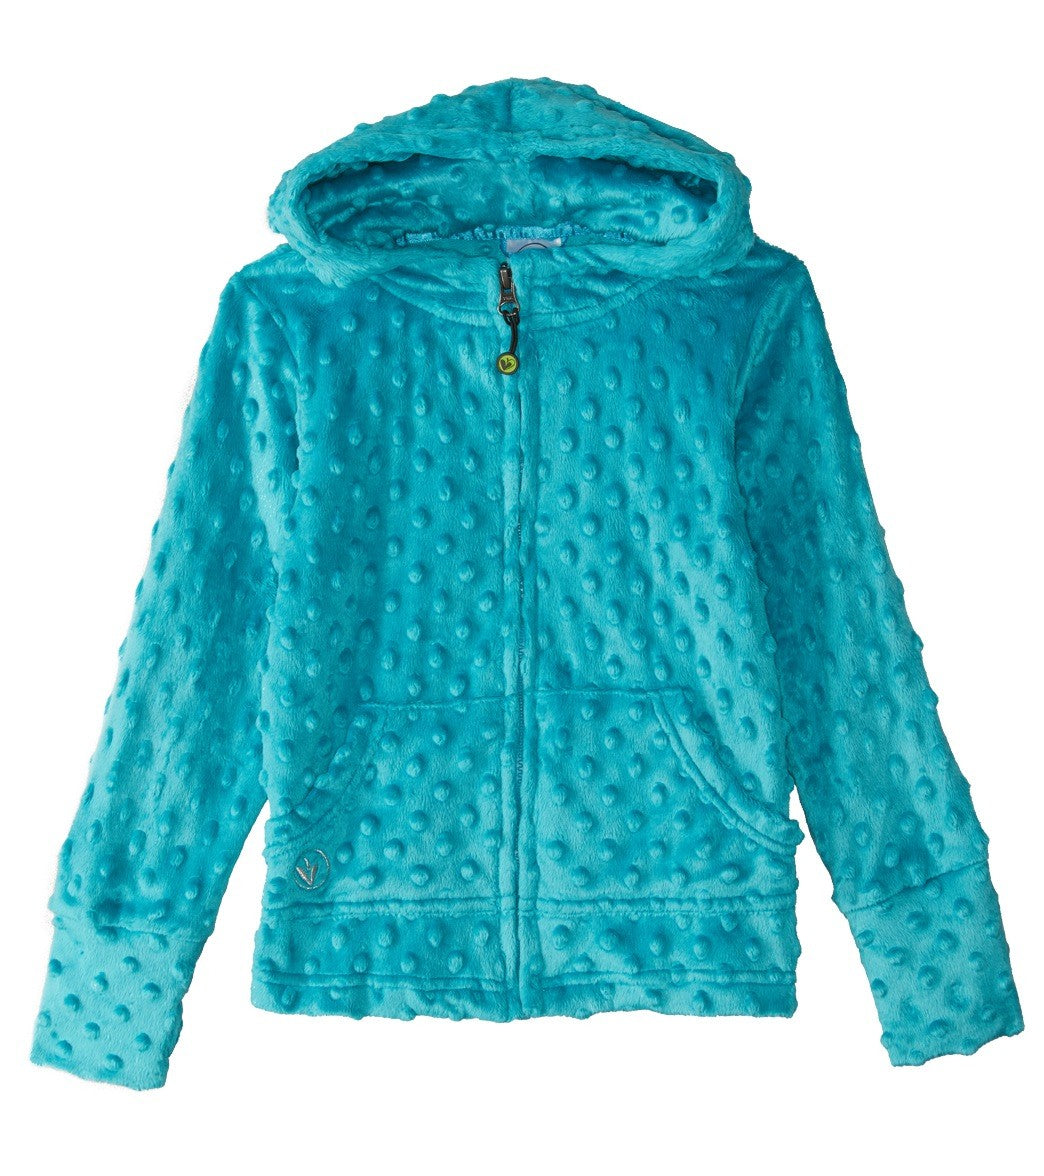 Limeapple Girls' Cuddle Bubble Hoodie Little Kid/Big Kid - Turquoise 5 Polyester - Swimoutlet.com